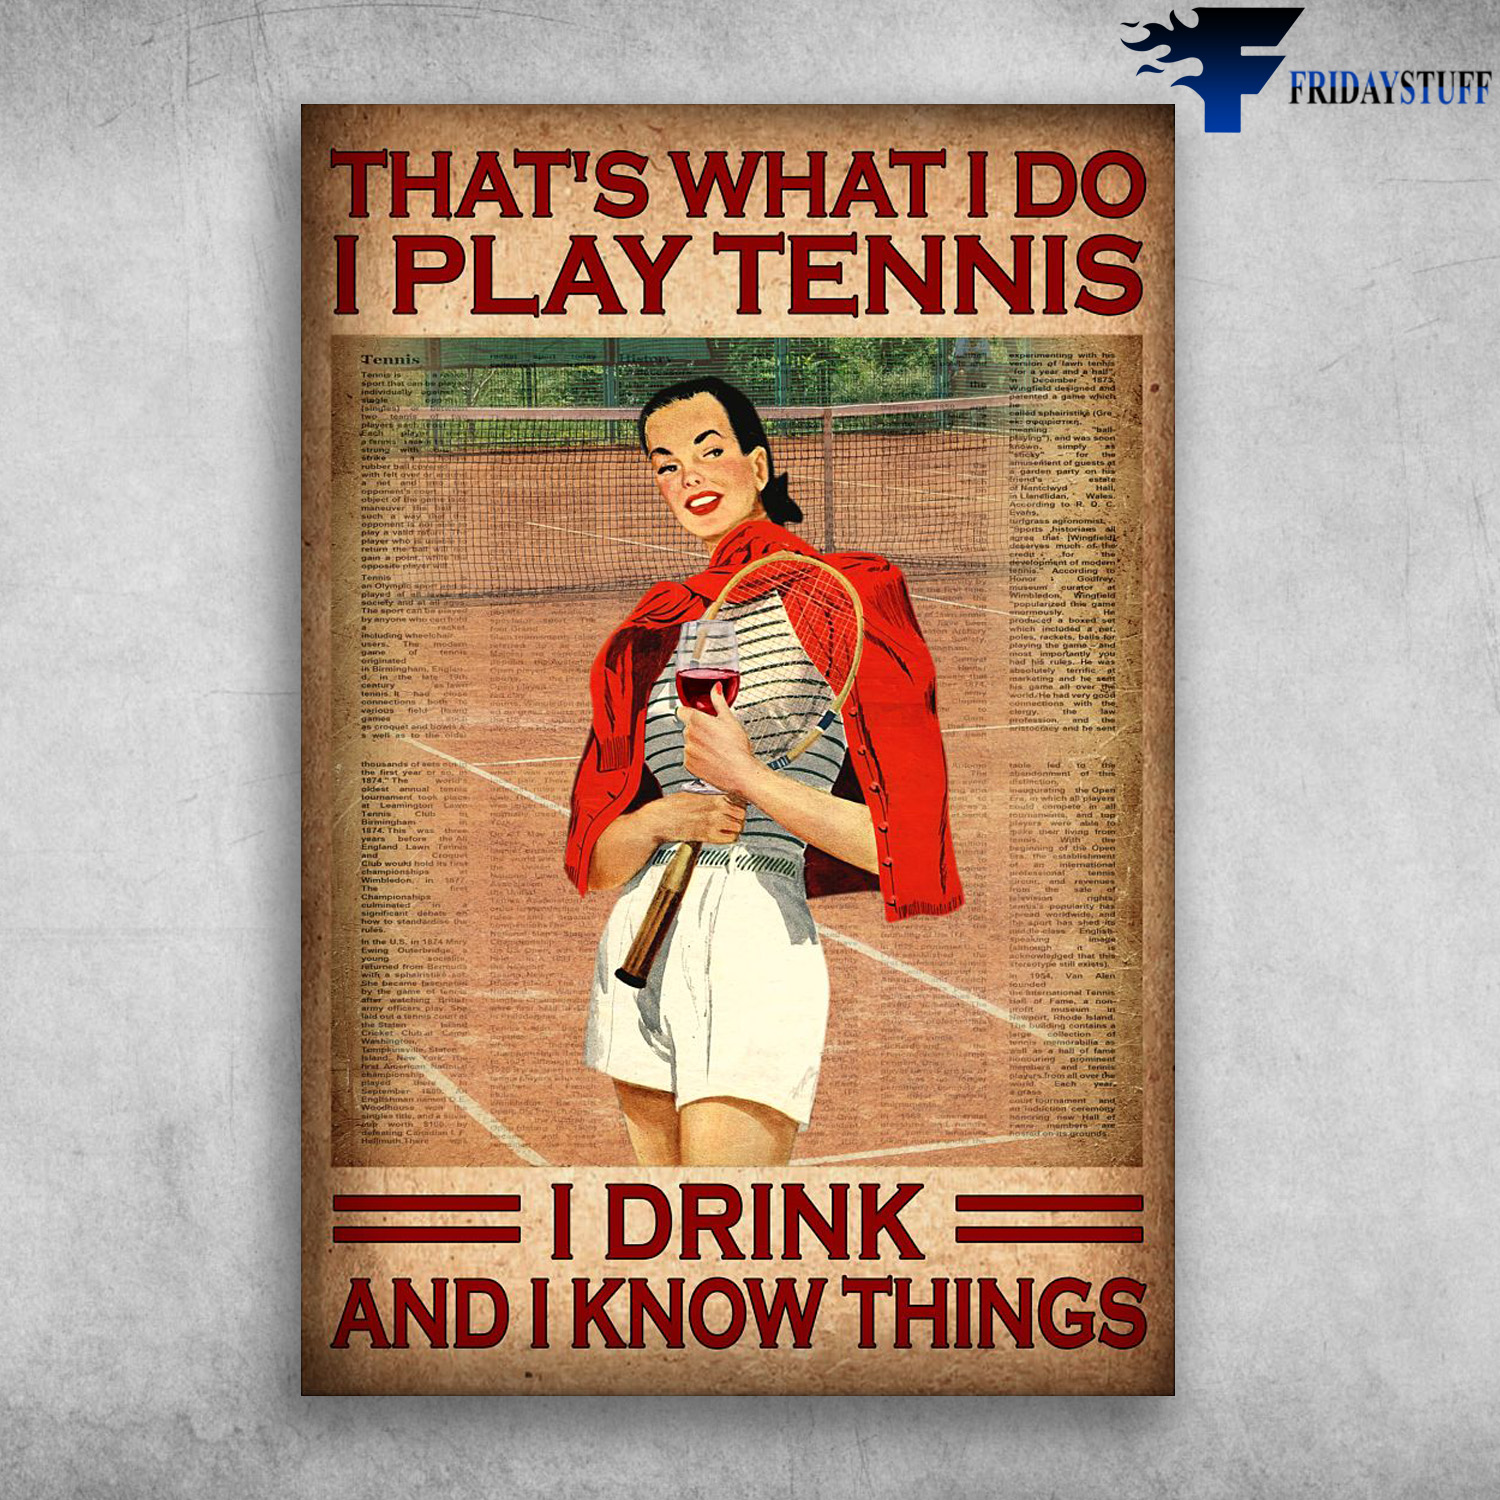 Girl Tennis And Wine - That's What I Do, I Play Tennis, I Drink, And I Know Things